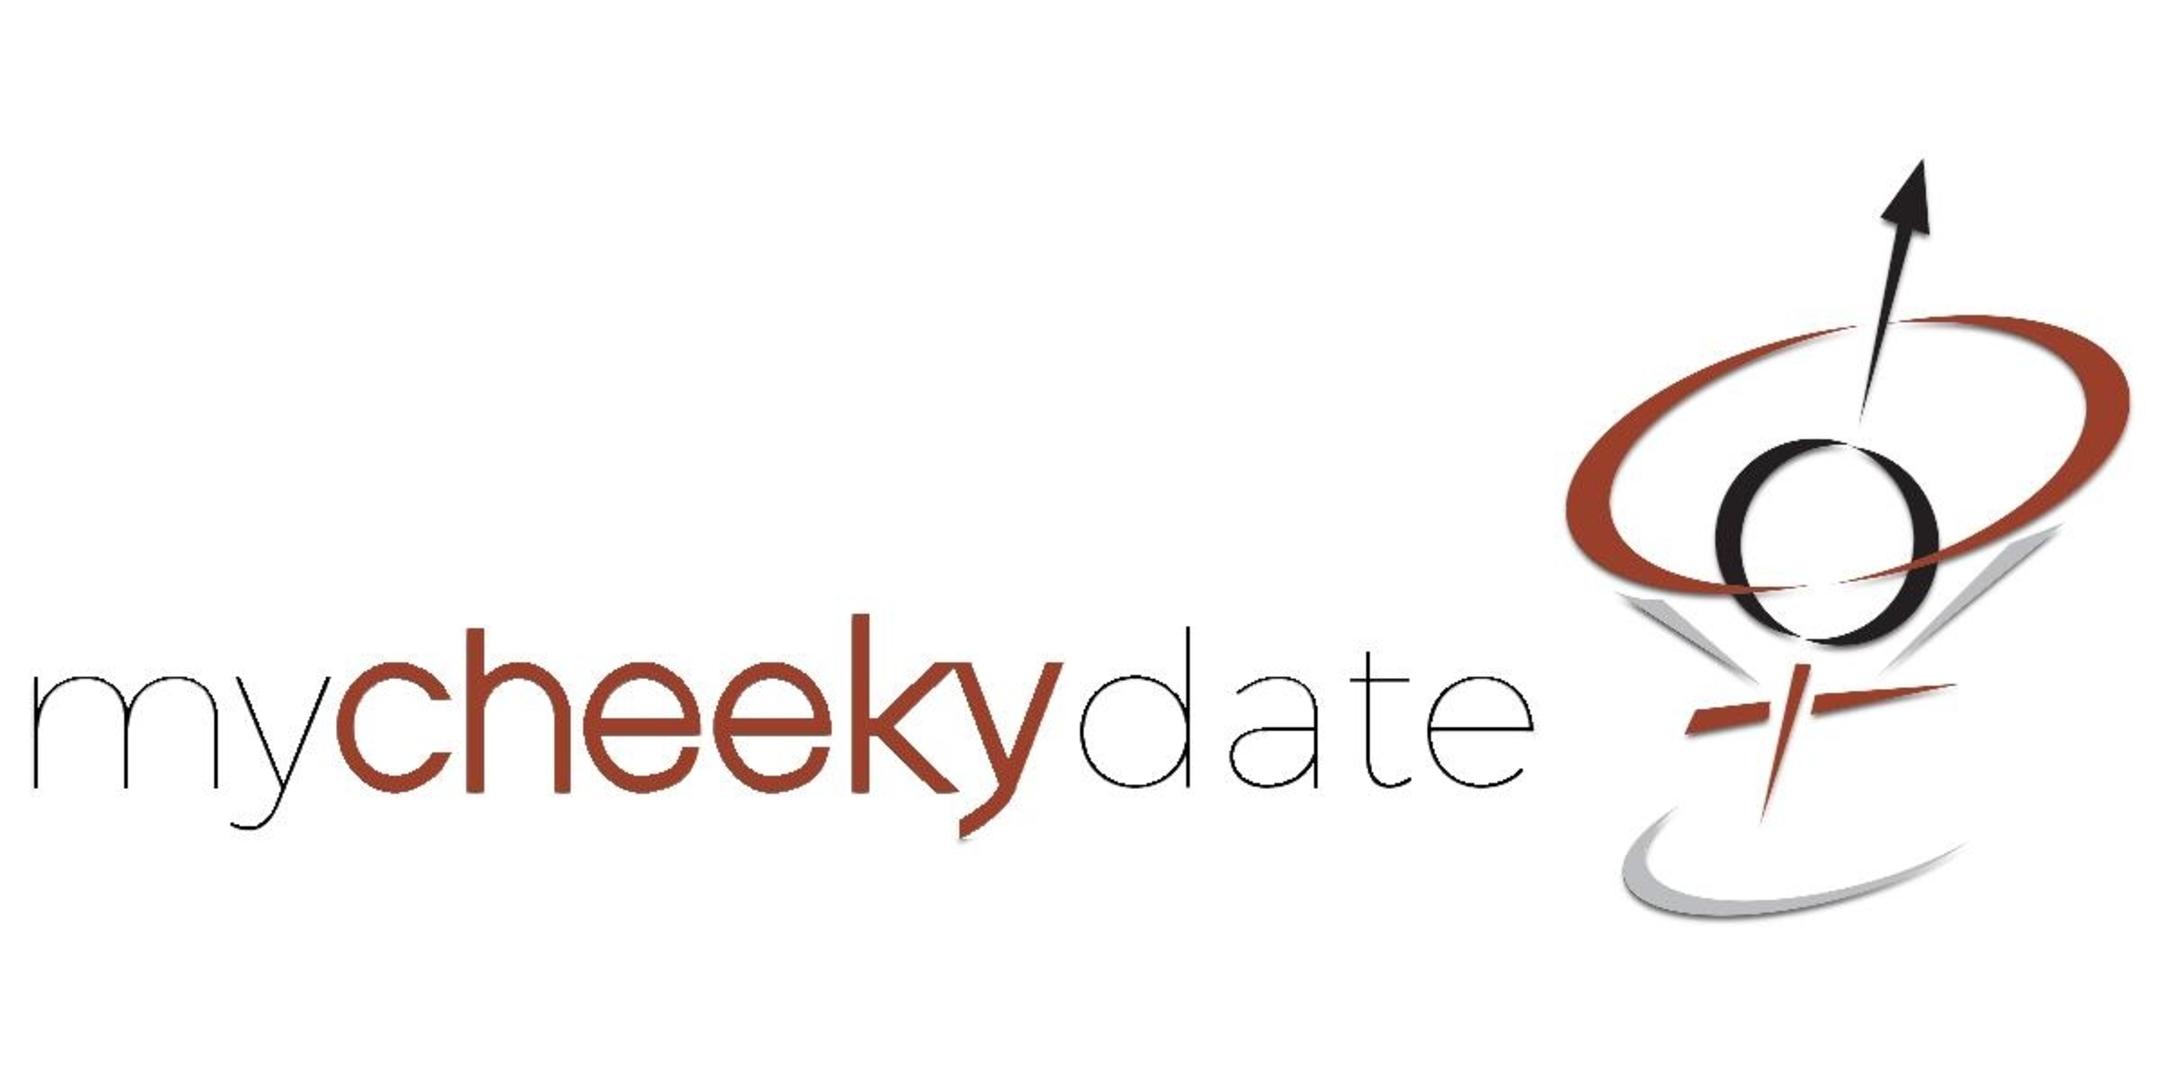 Singles event | Speed Dating in LA (Ages 24-38) | MyCheekyDate